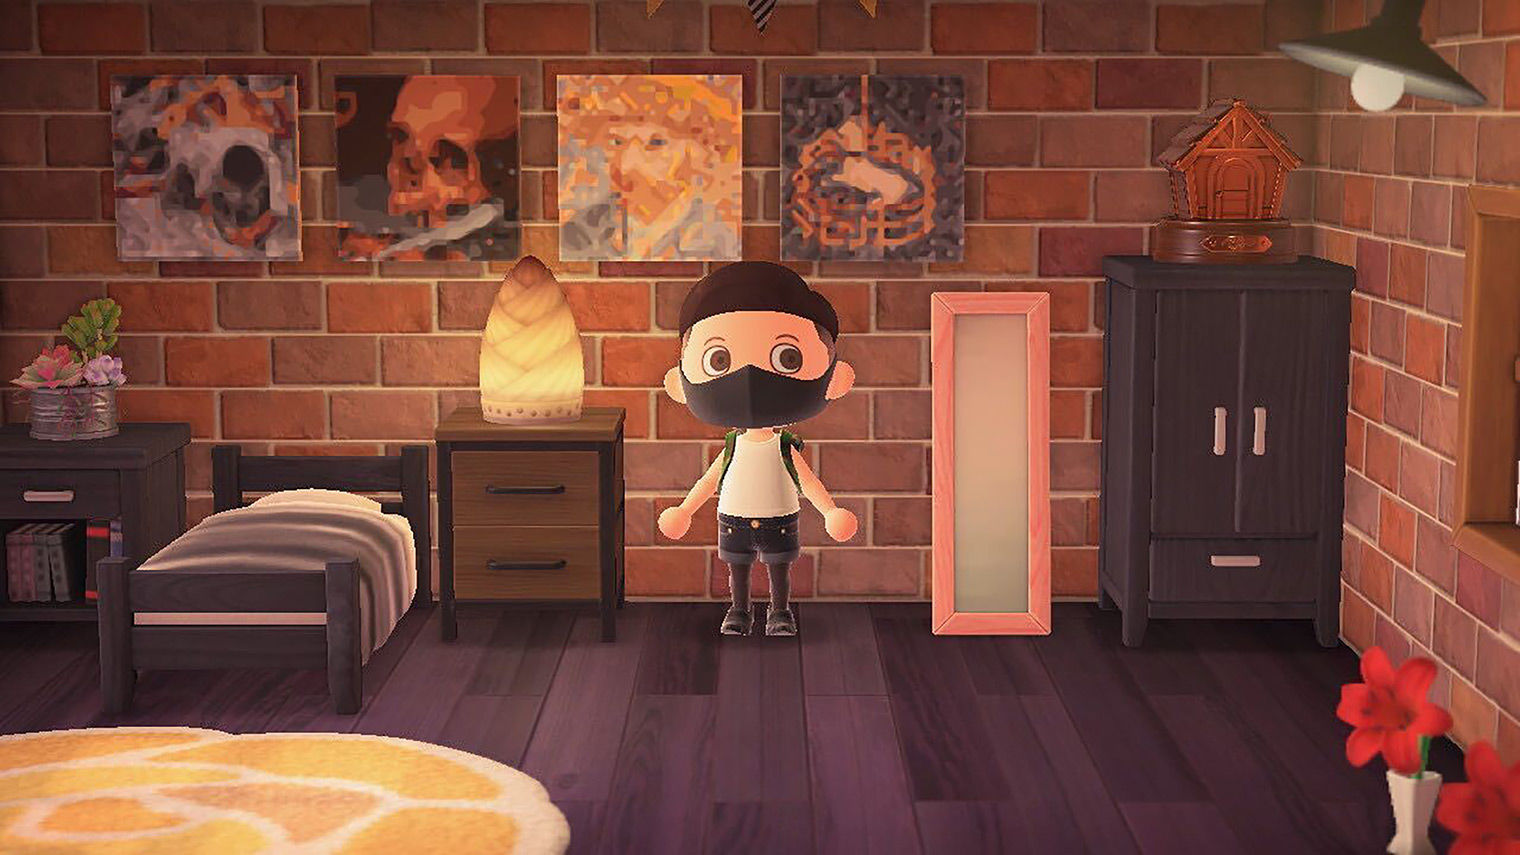 A screenshot from Animal Crossing depicting a living room filled with art